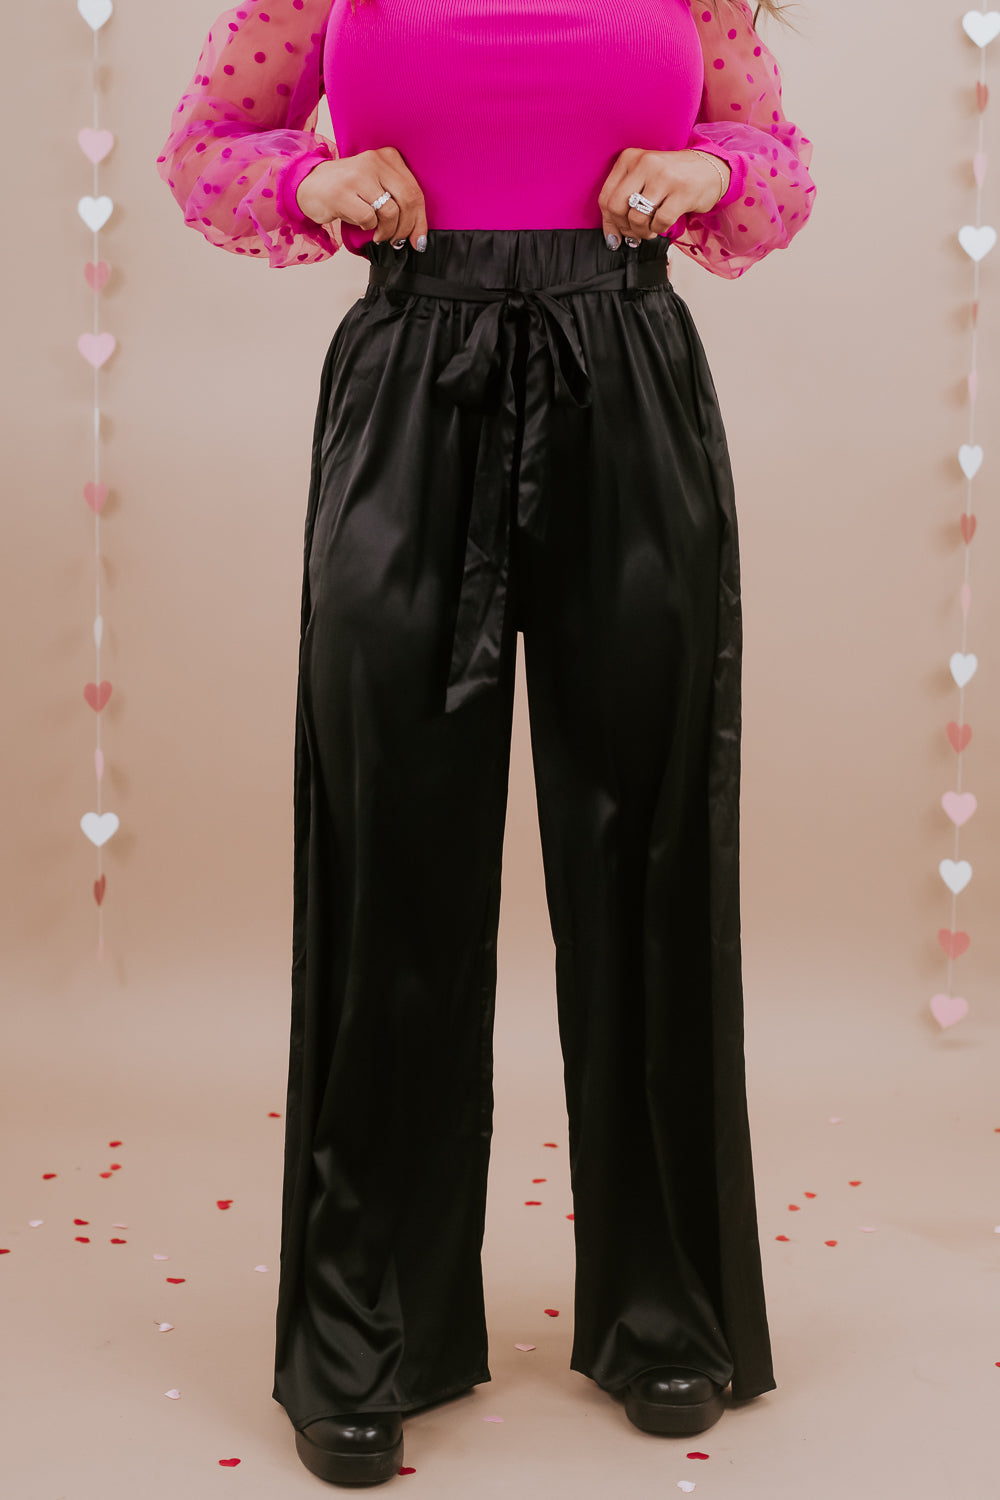 Best For Last Satin Pant, Black – Everyday Chic Boutique